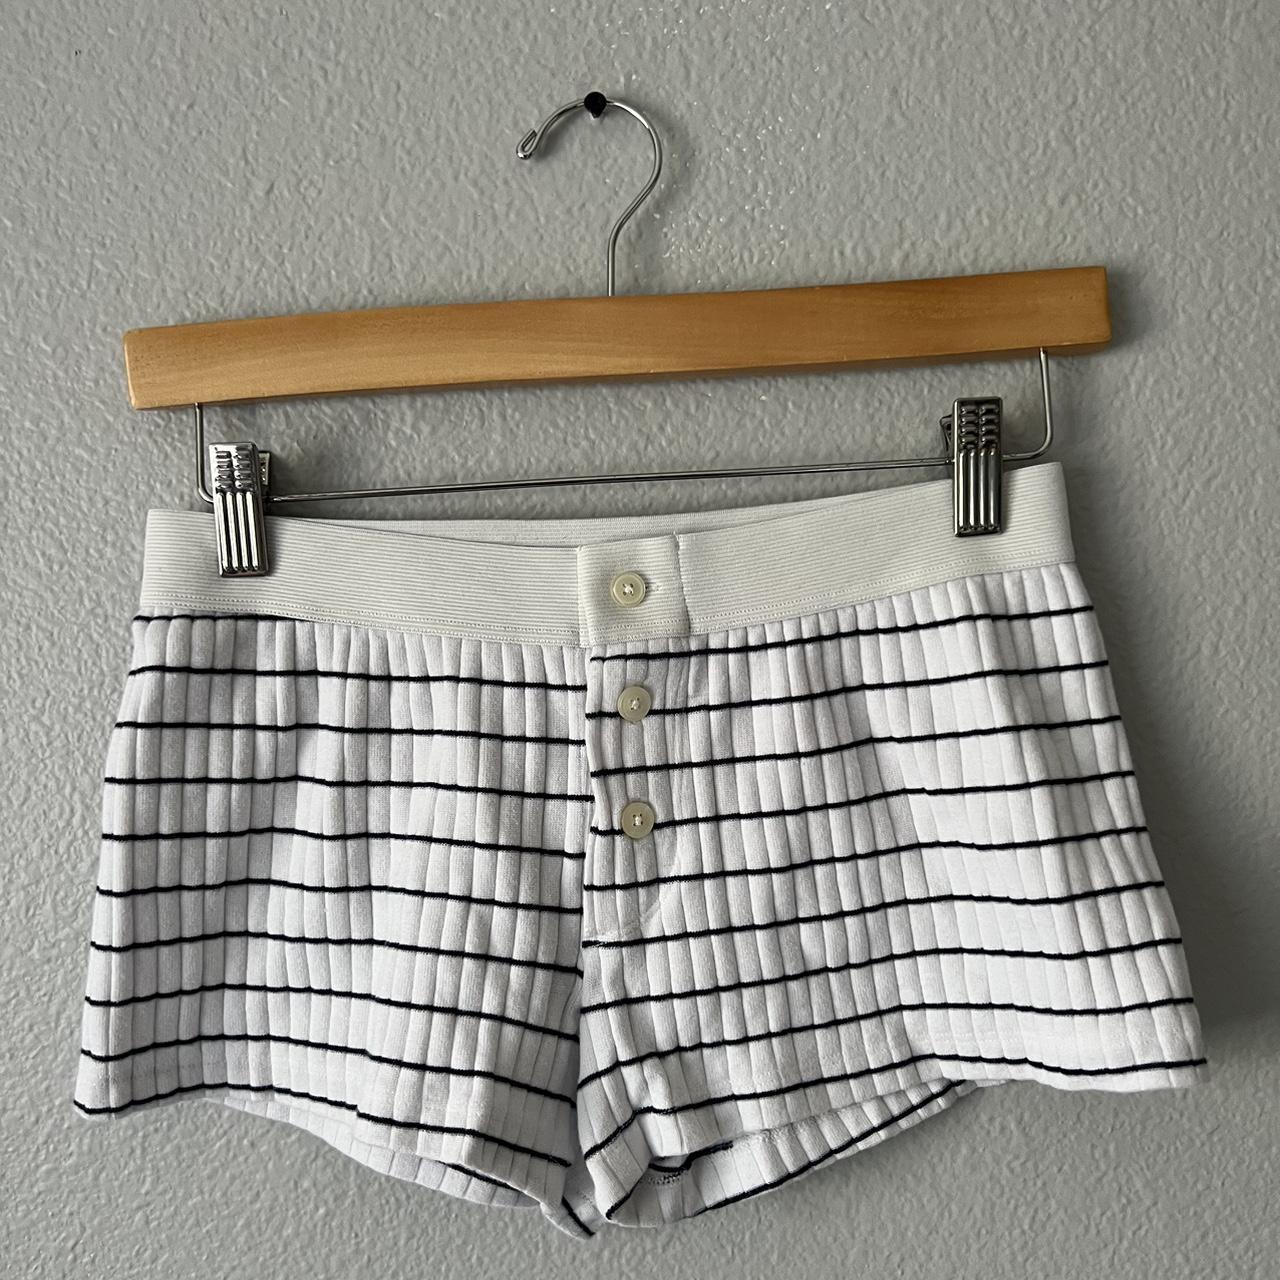 Brandy Melville Women's White and Navy Shorts